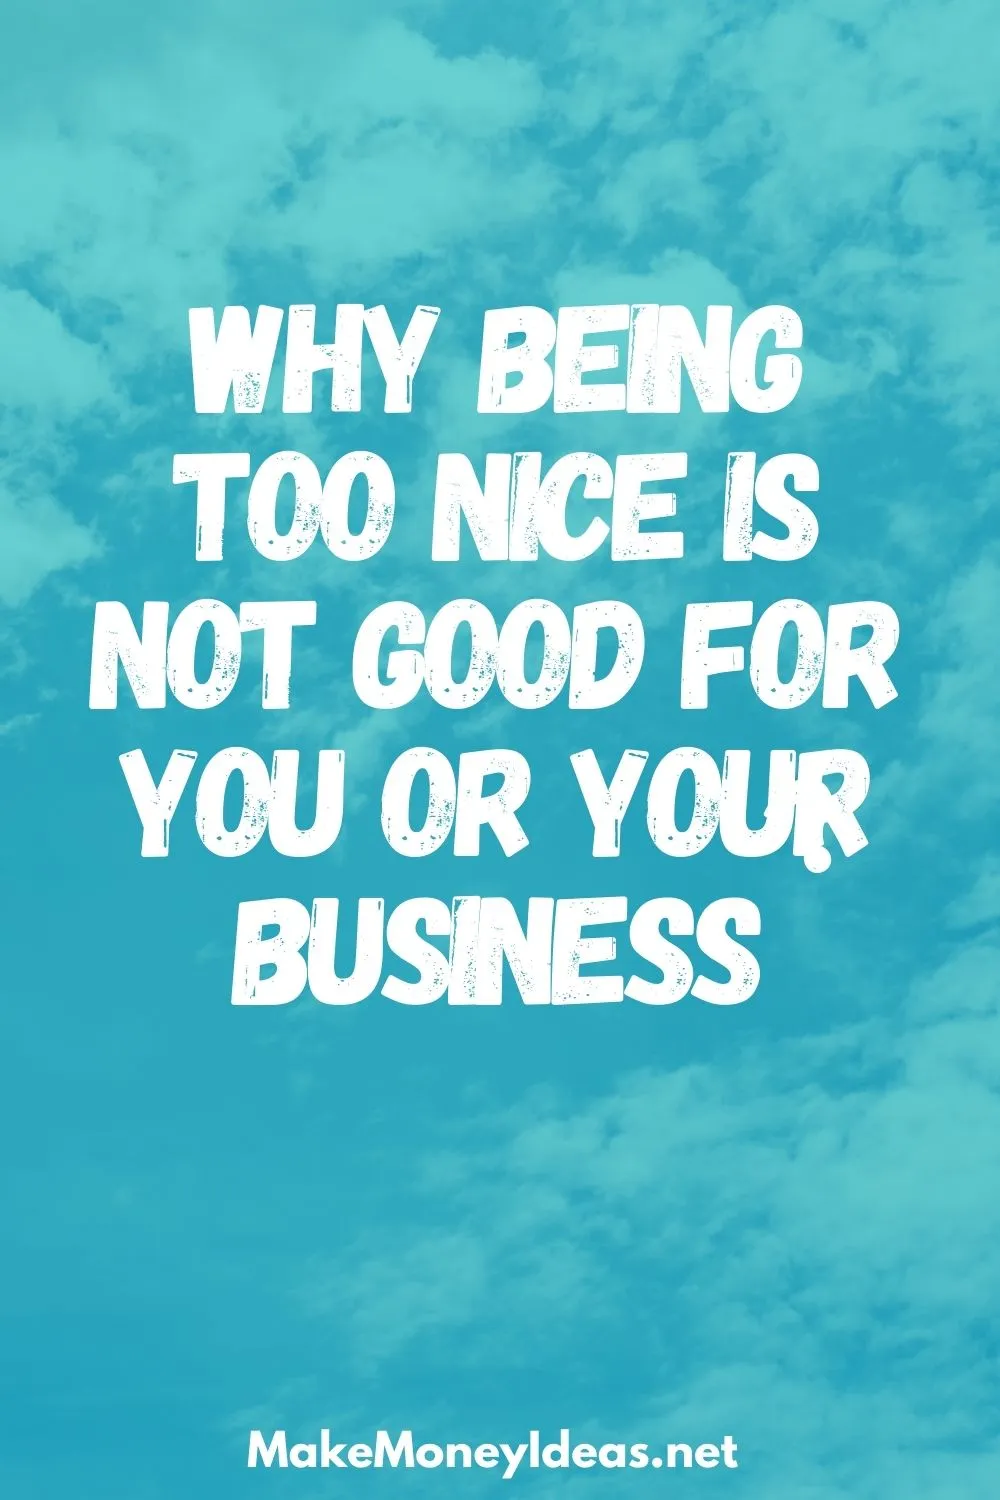 Why being too nice is not good for you or your business